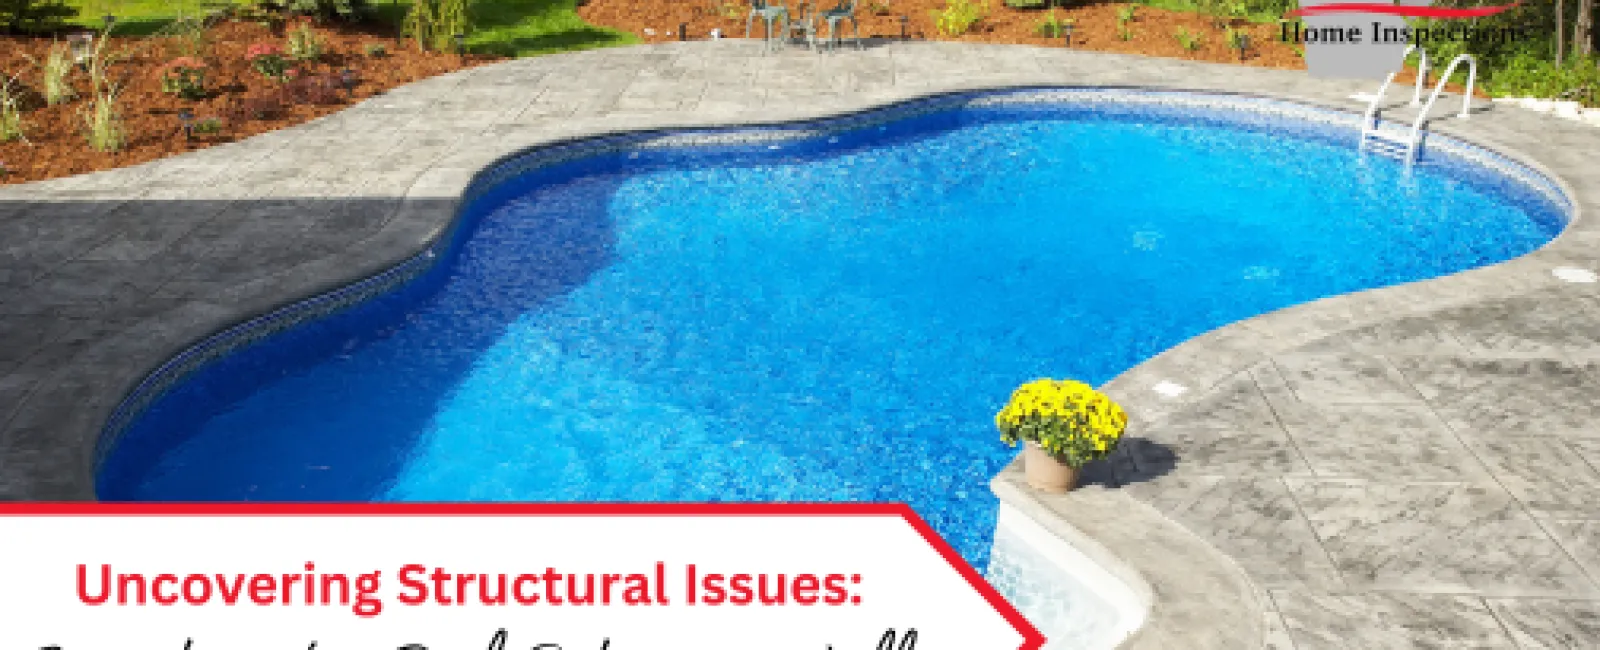 Uncovering Structural Issues: Inspection of a Pool Retaining Wall